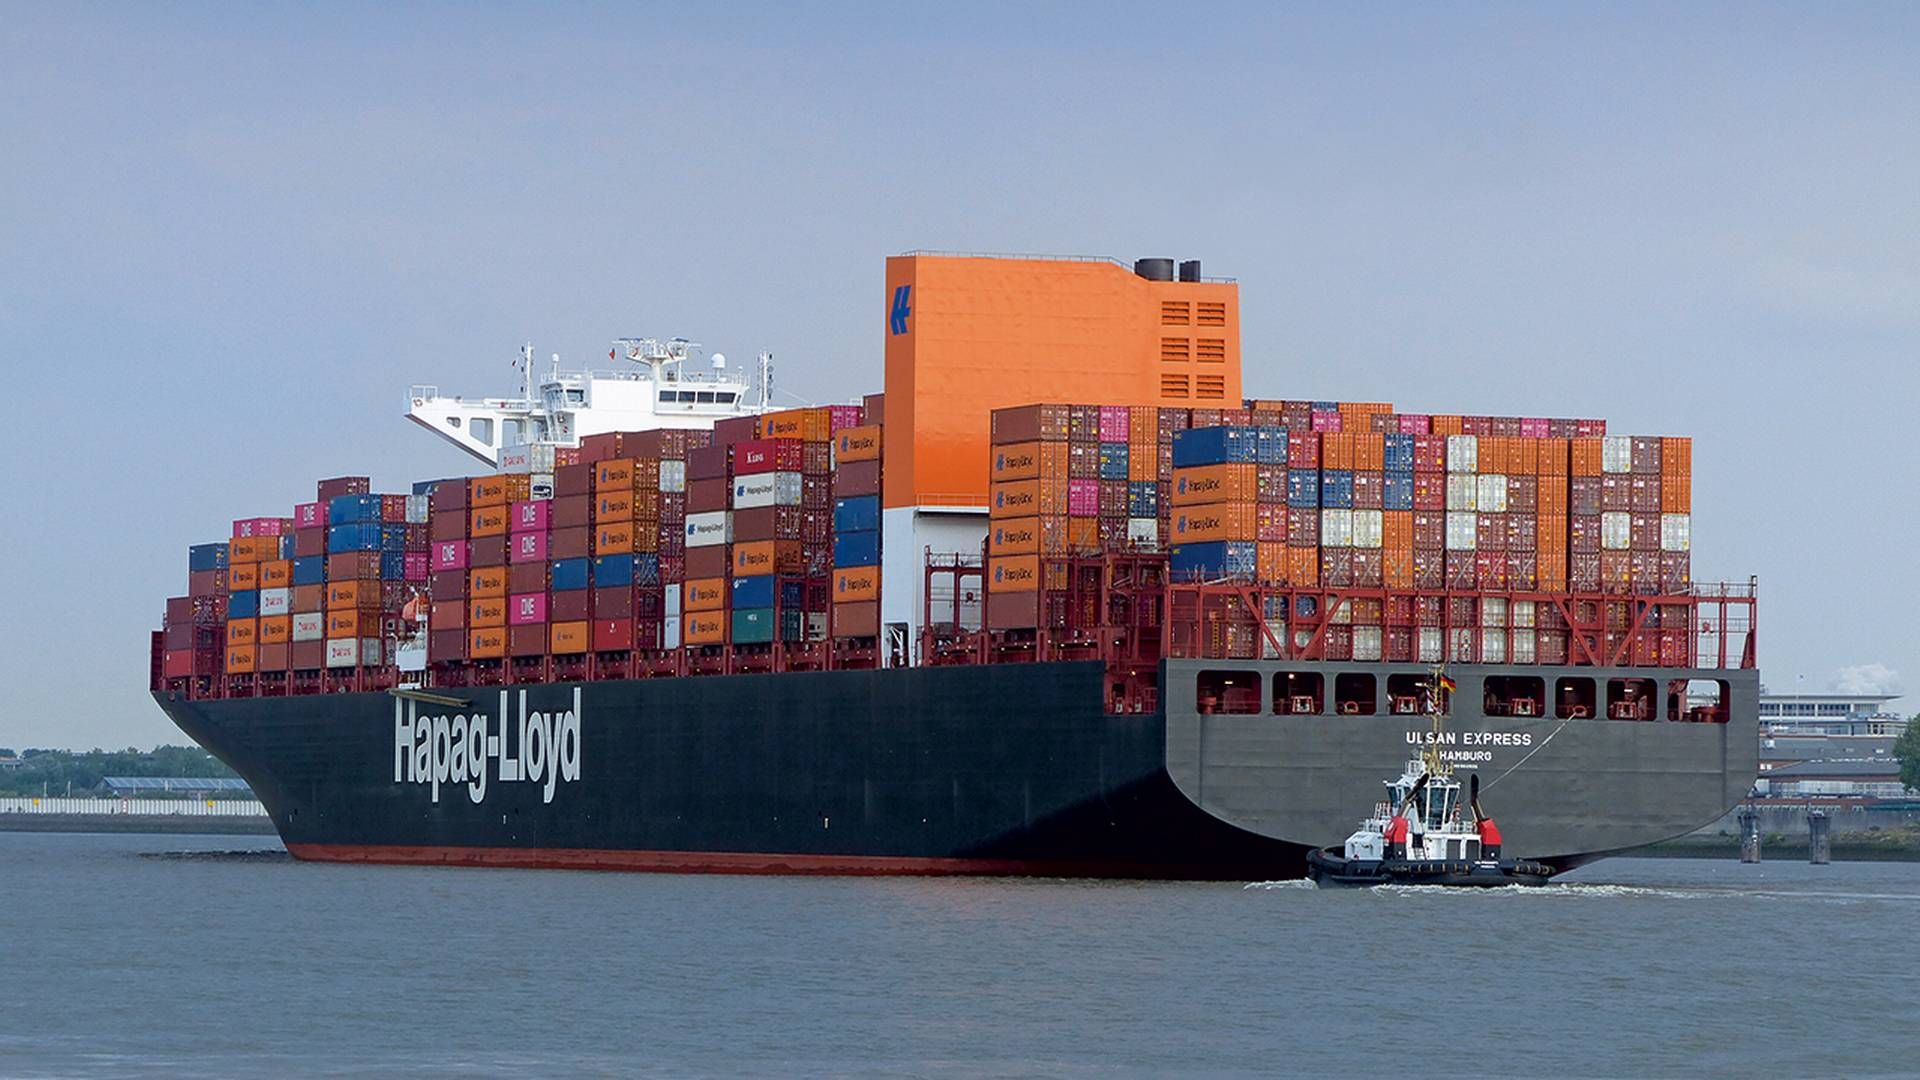 Hapag Lloyd will continue to divert its ships until Jan. 9. | Photo: Pr-foto